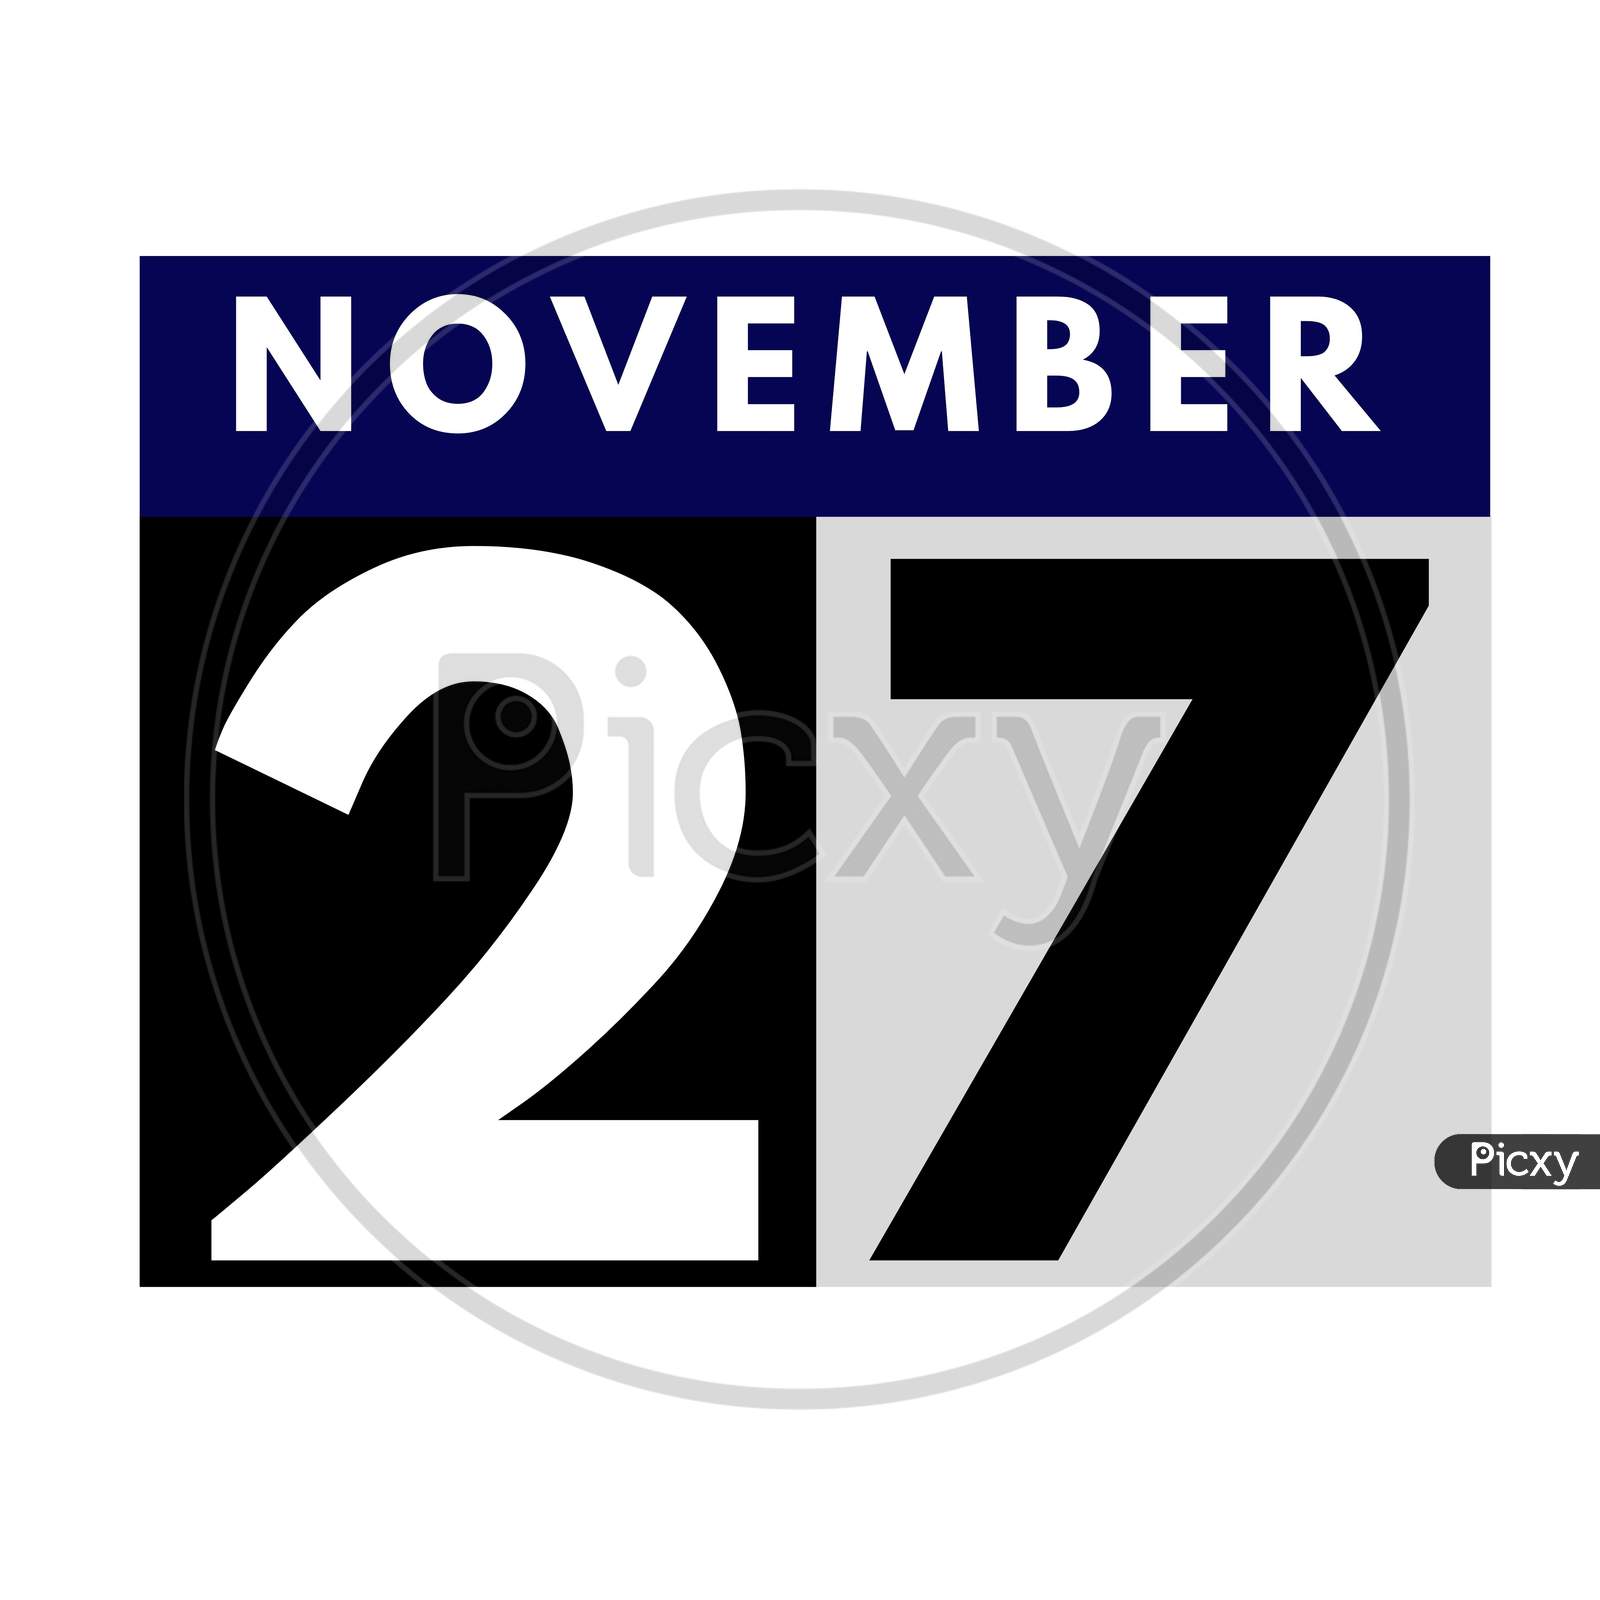 November 27 . Flat Daily Calendar Icon .Date ,Day, Month .Calendar For The Month Of November